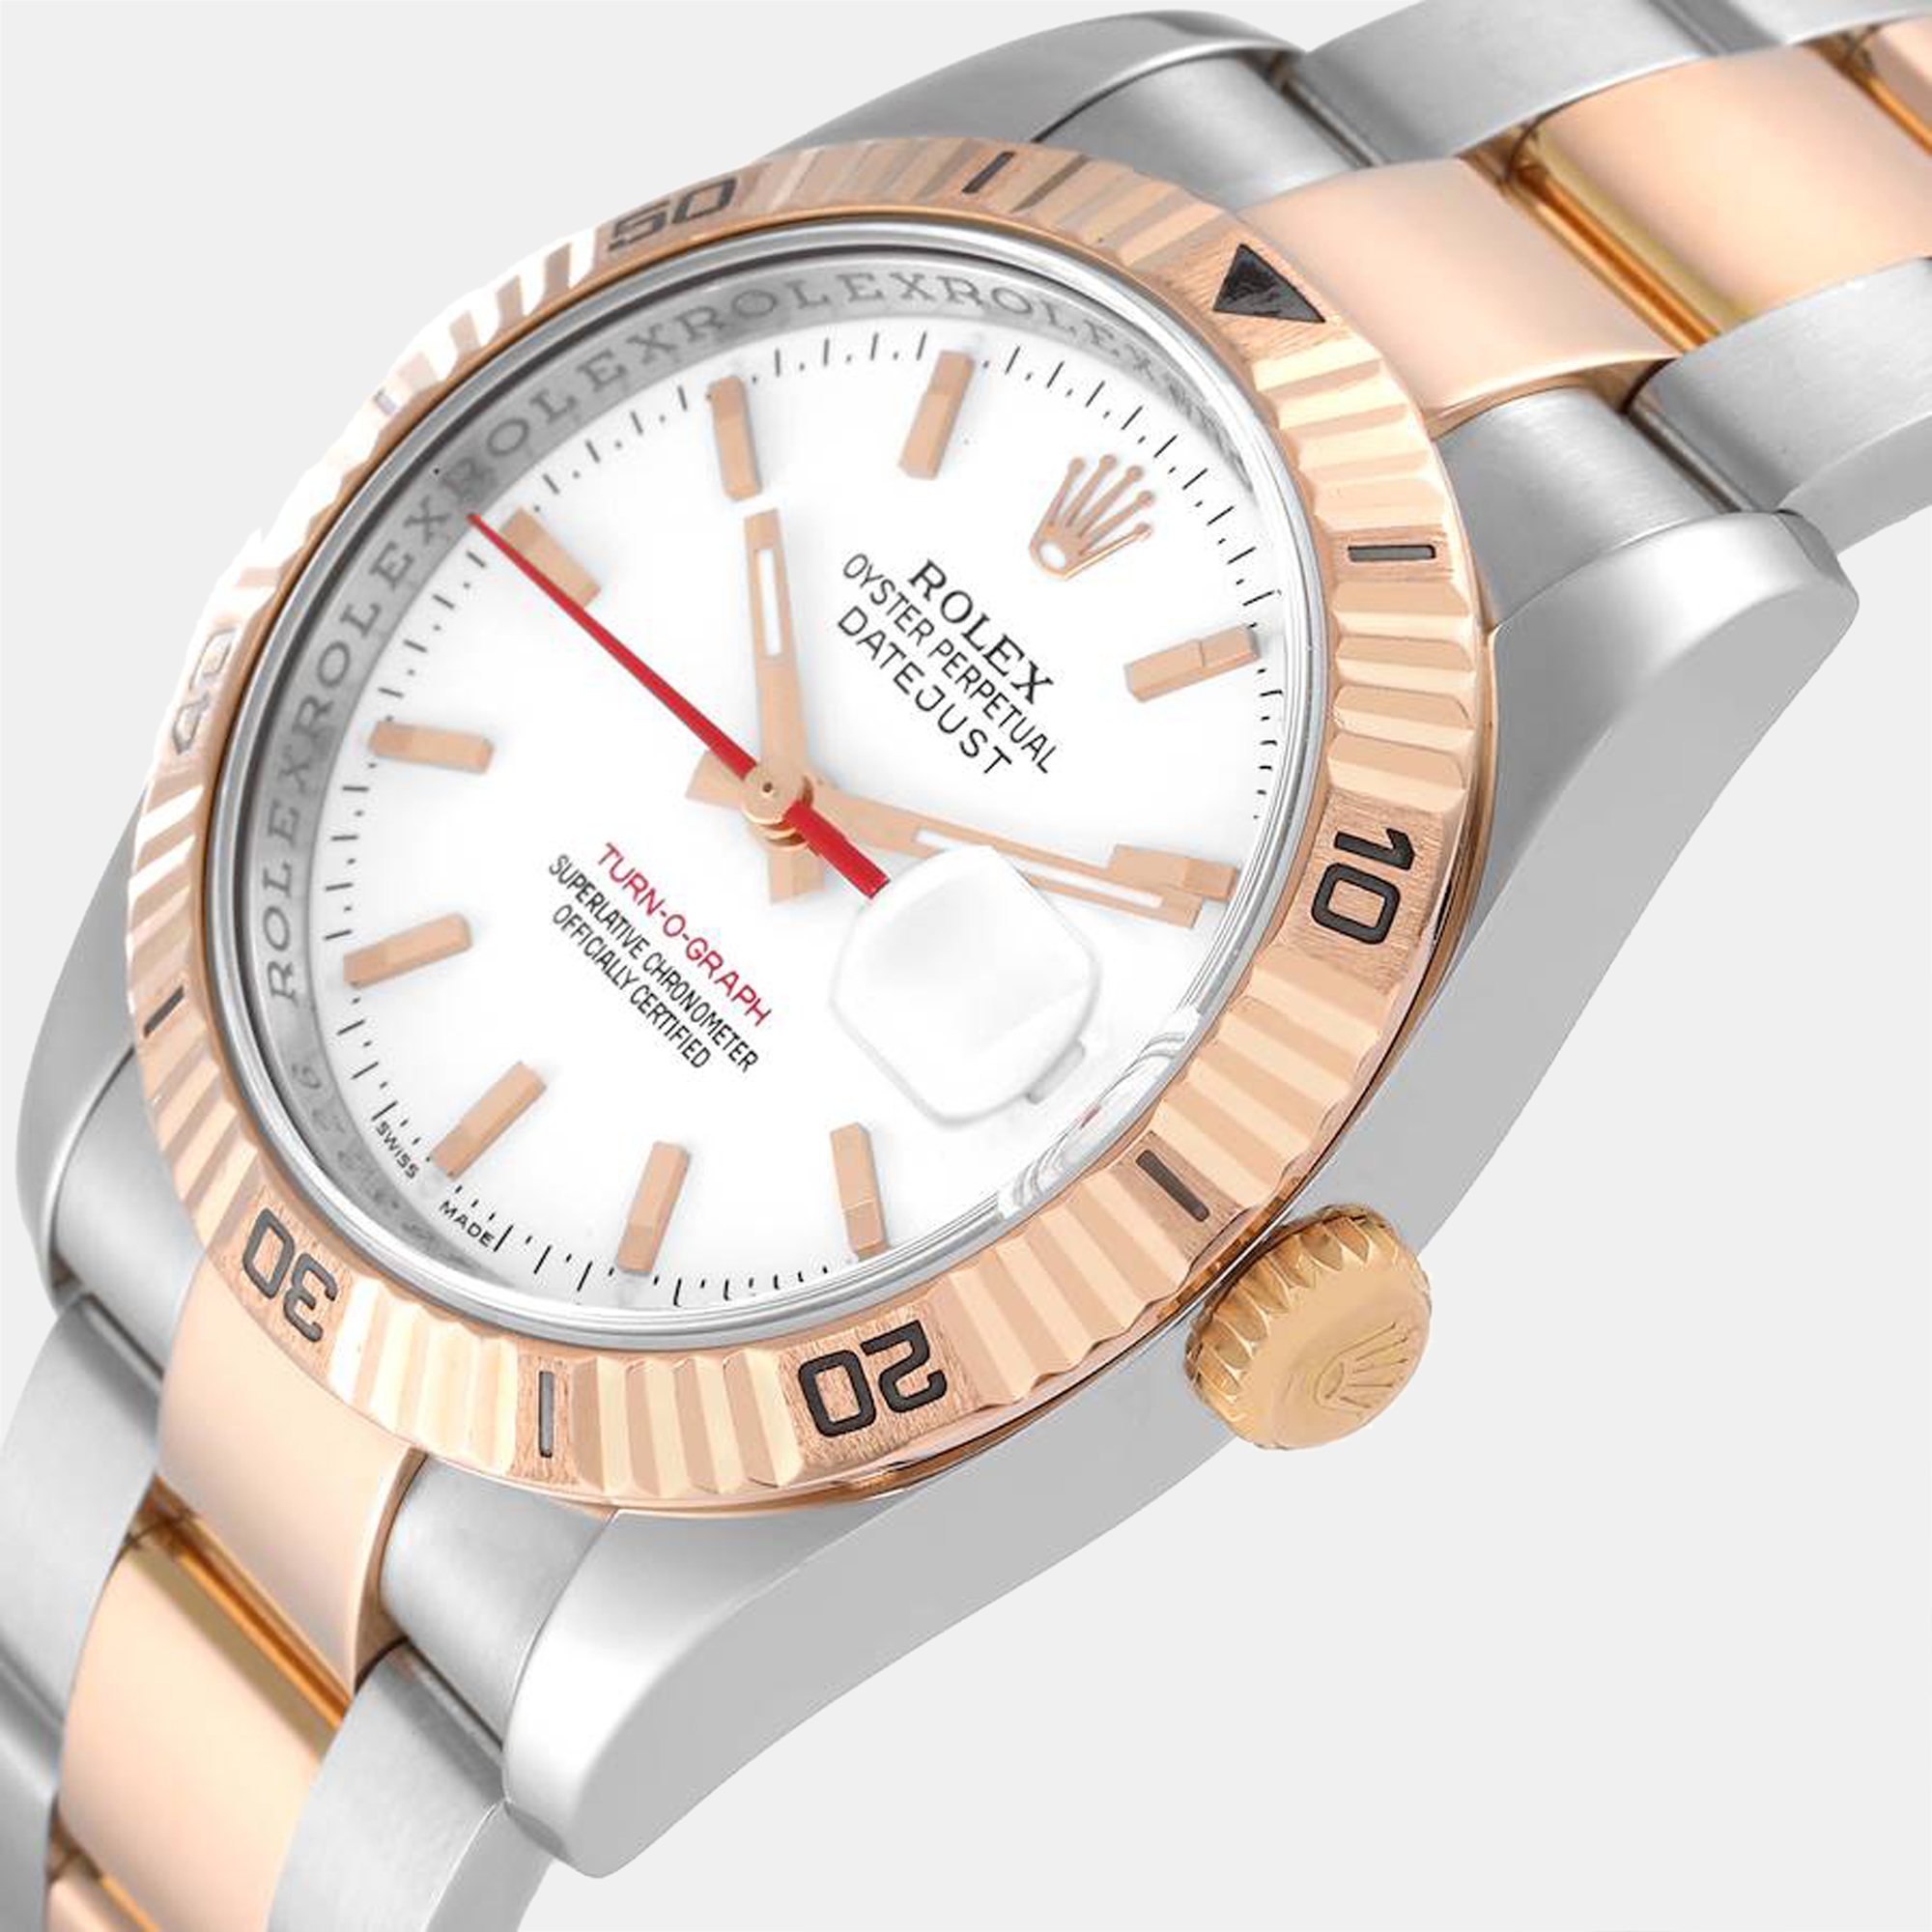 

Rolex White 18K Rose Gold And Stainless Steel Datejust Turnograph 116261 Automatic Men's Wristwatch 36 mm